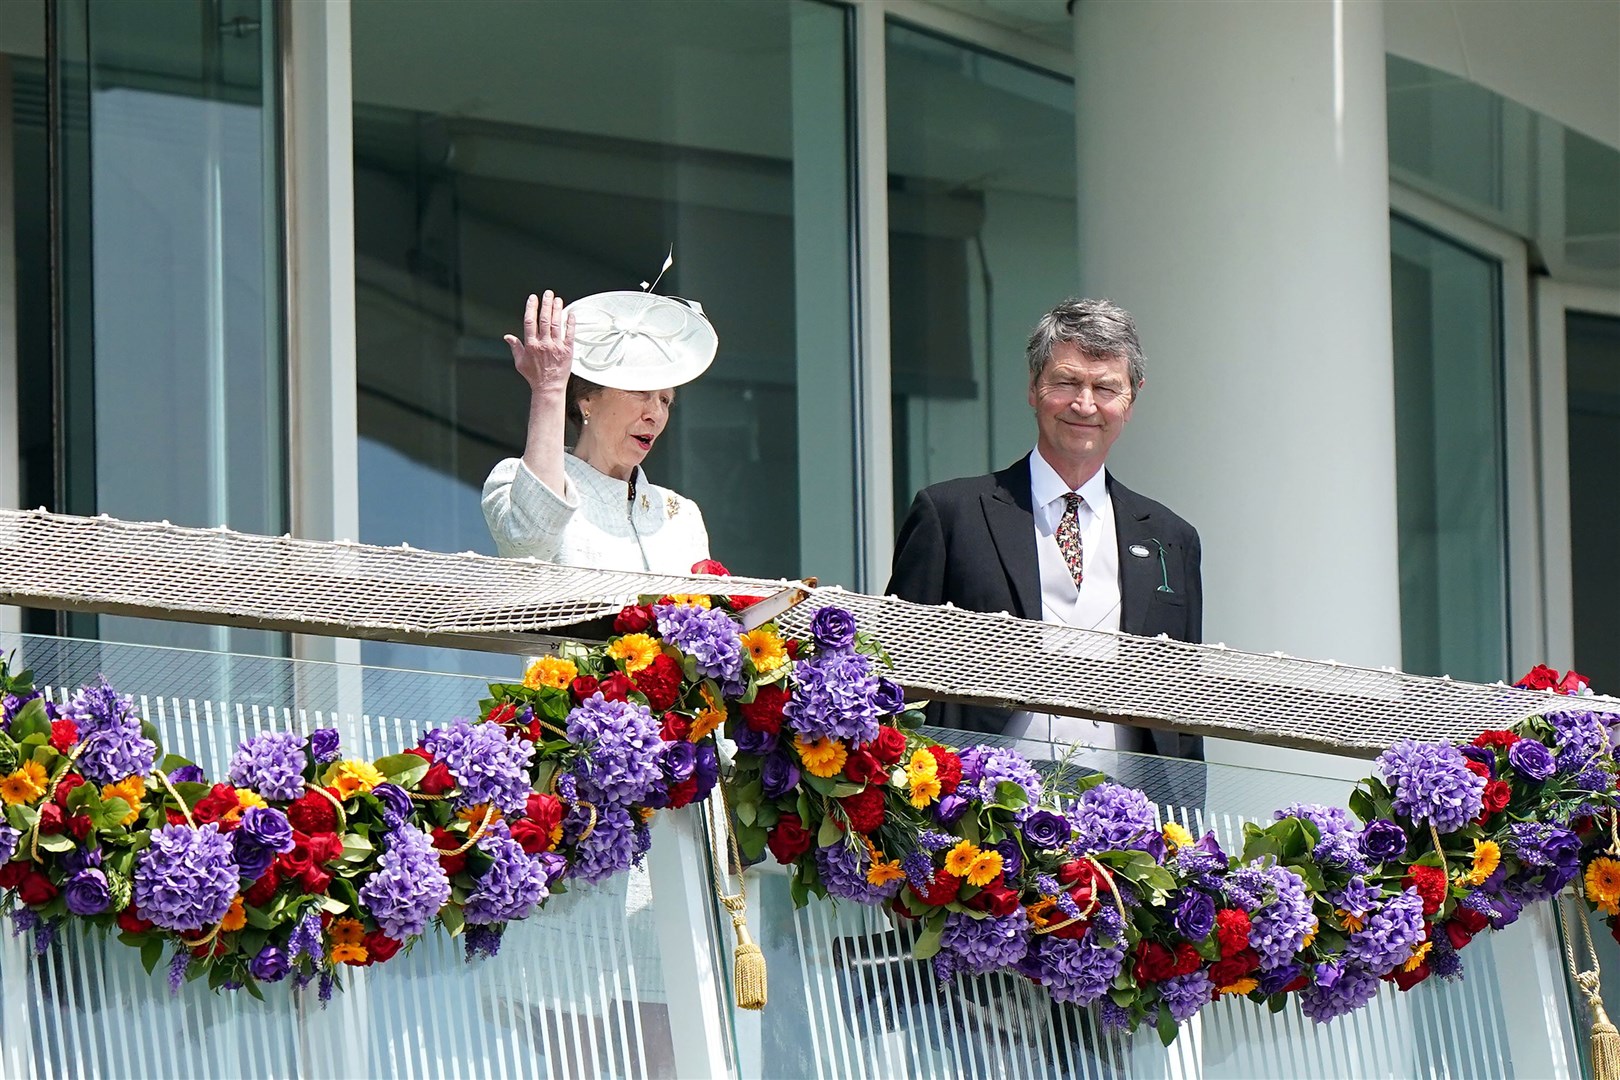 Anne and her husband, Vice Admiral Sir Tim Laurence, were in attendance while the Queen stayed in Windsor (Tim Goode/PA)